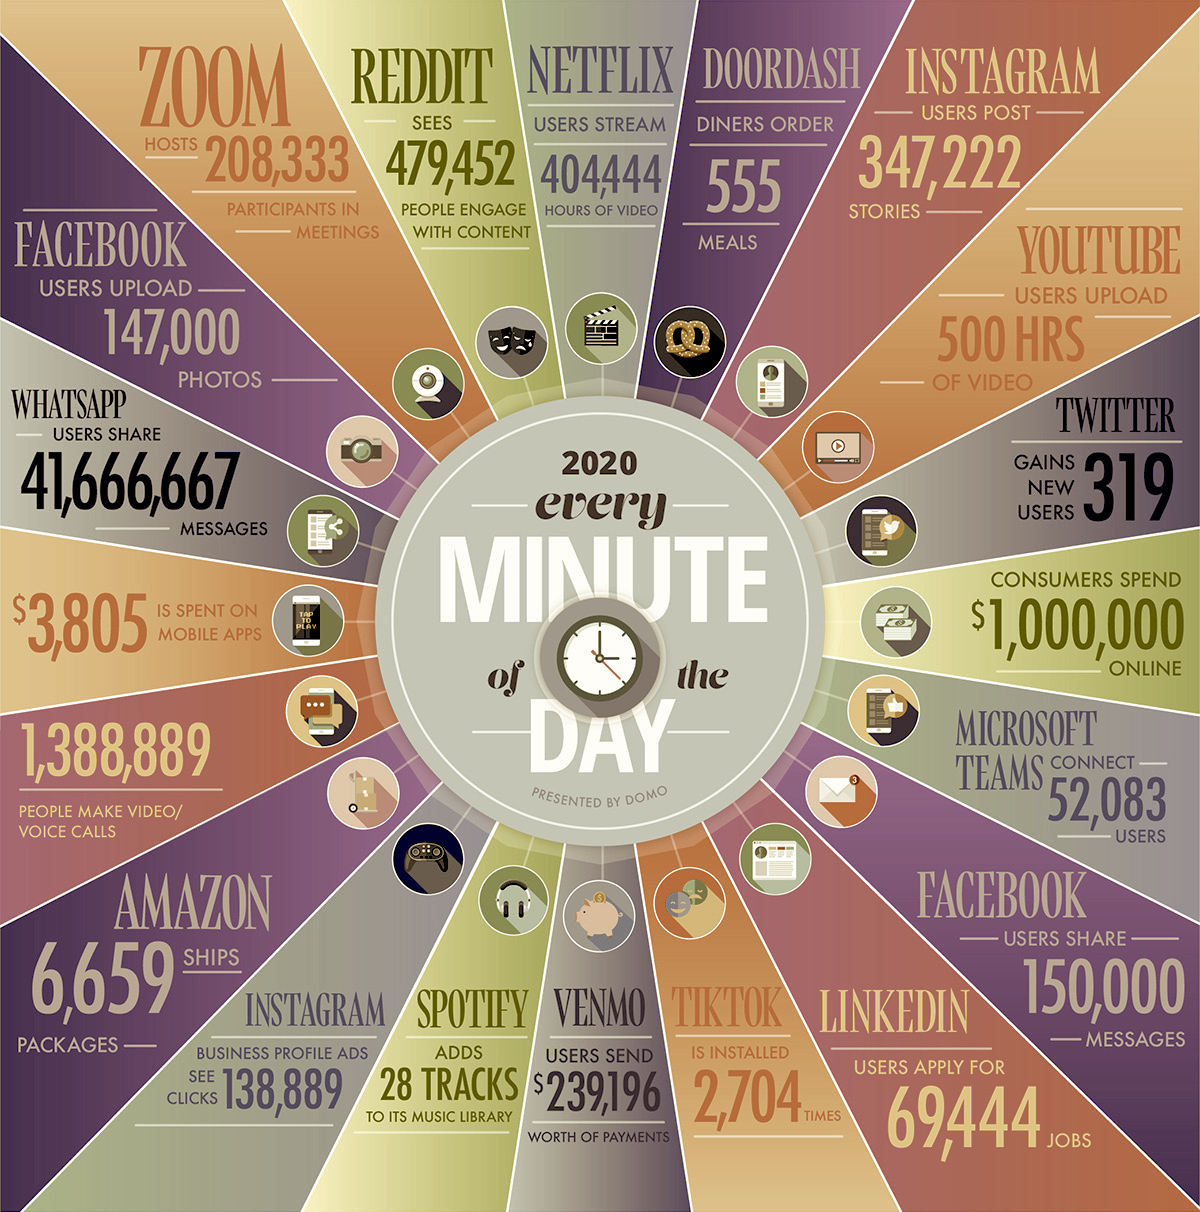 circle with text at center "2020 every minute of the day" with shapes fanning out with different info in each section